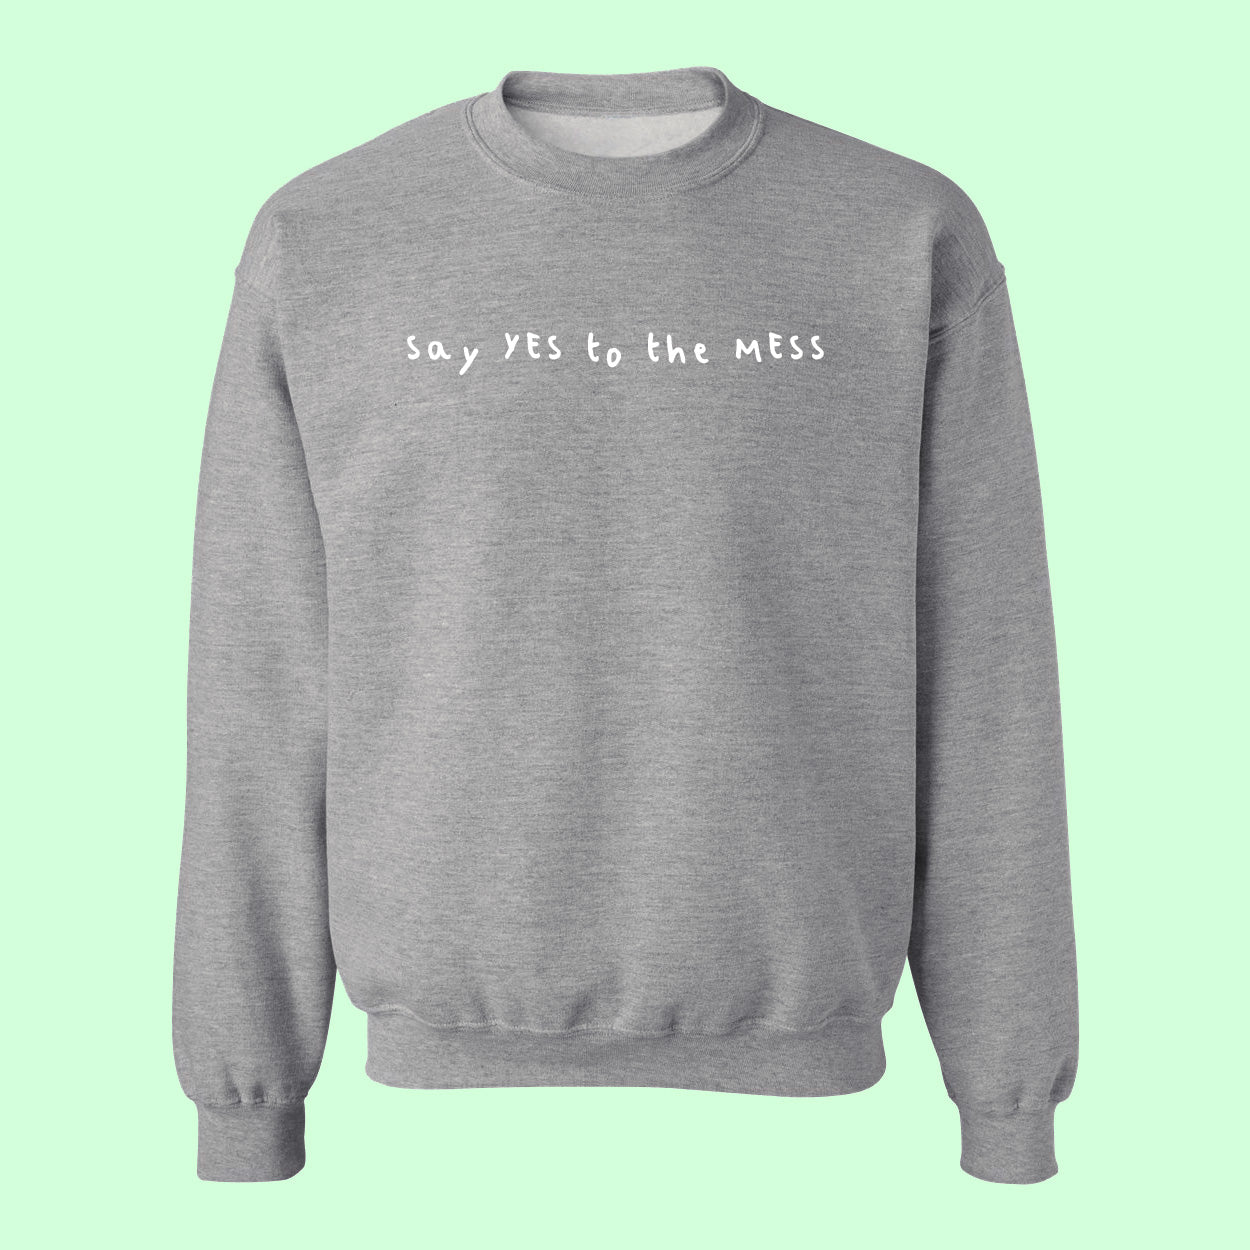 Say yes to the mess – Unisex crewneck